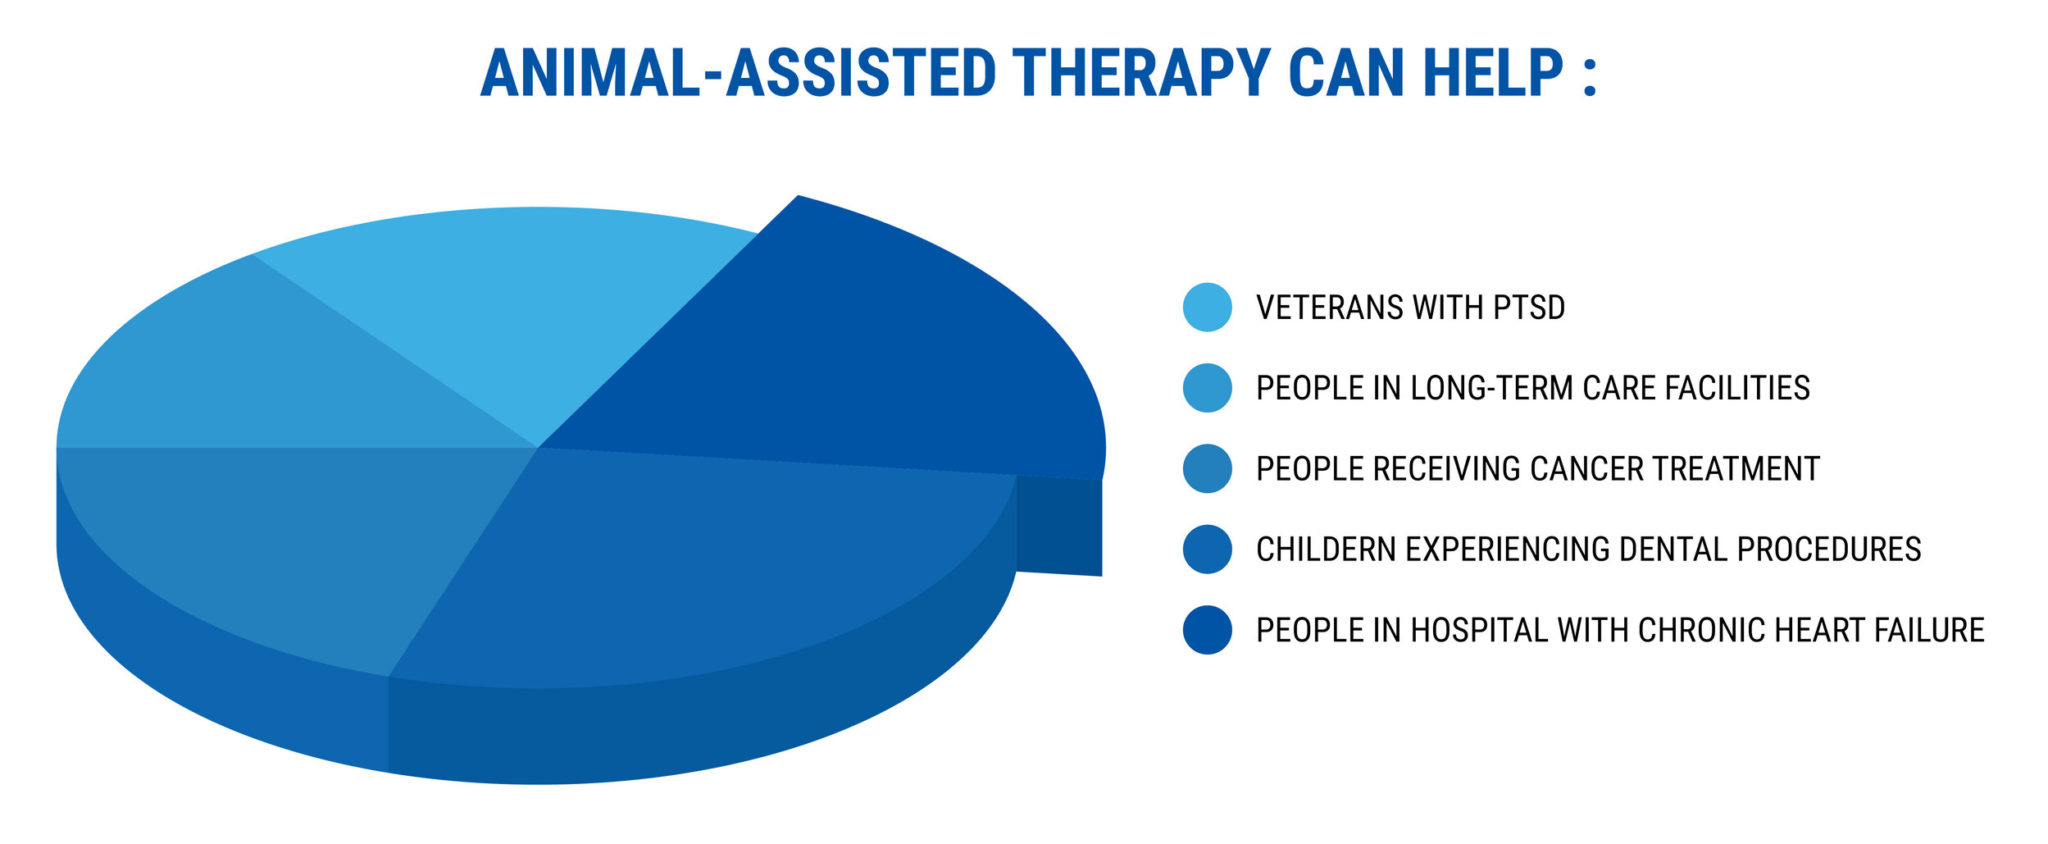 ANIMAL-ASSISTED THERAPY CAN HELP